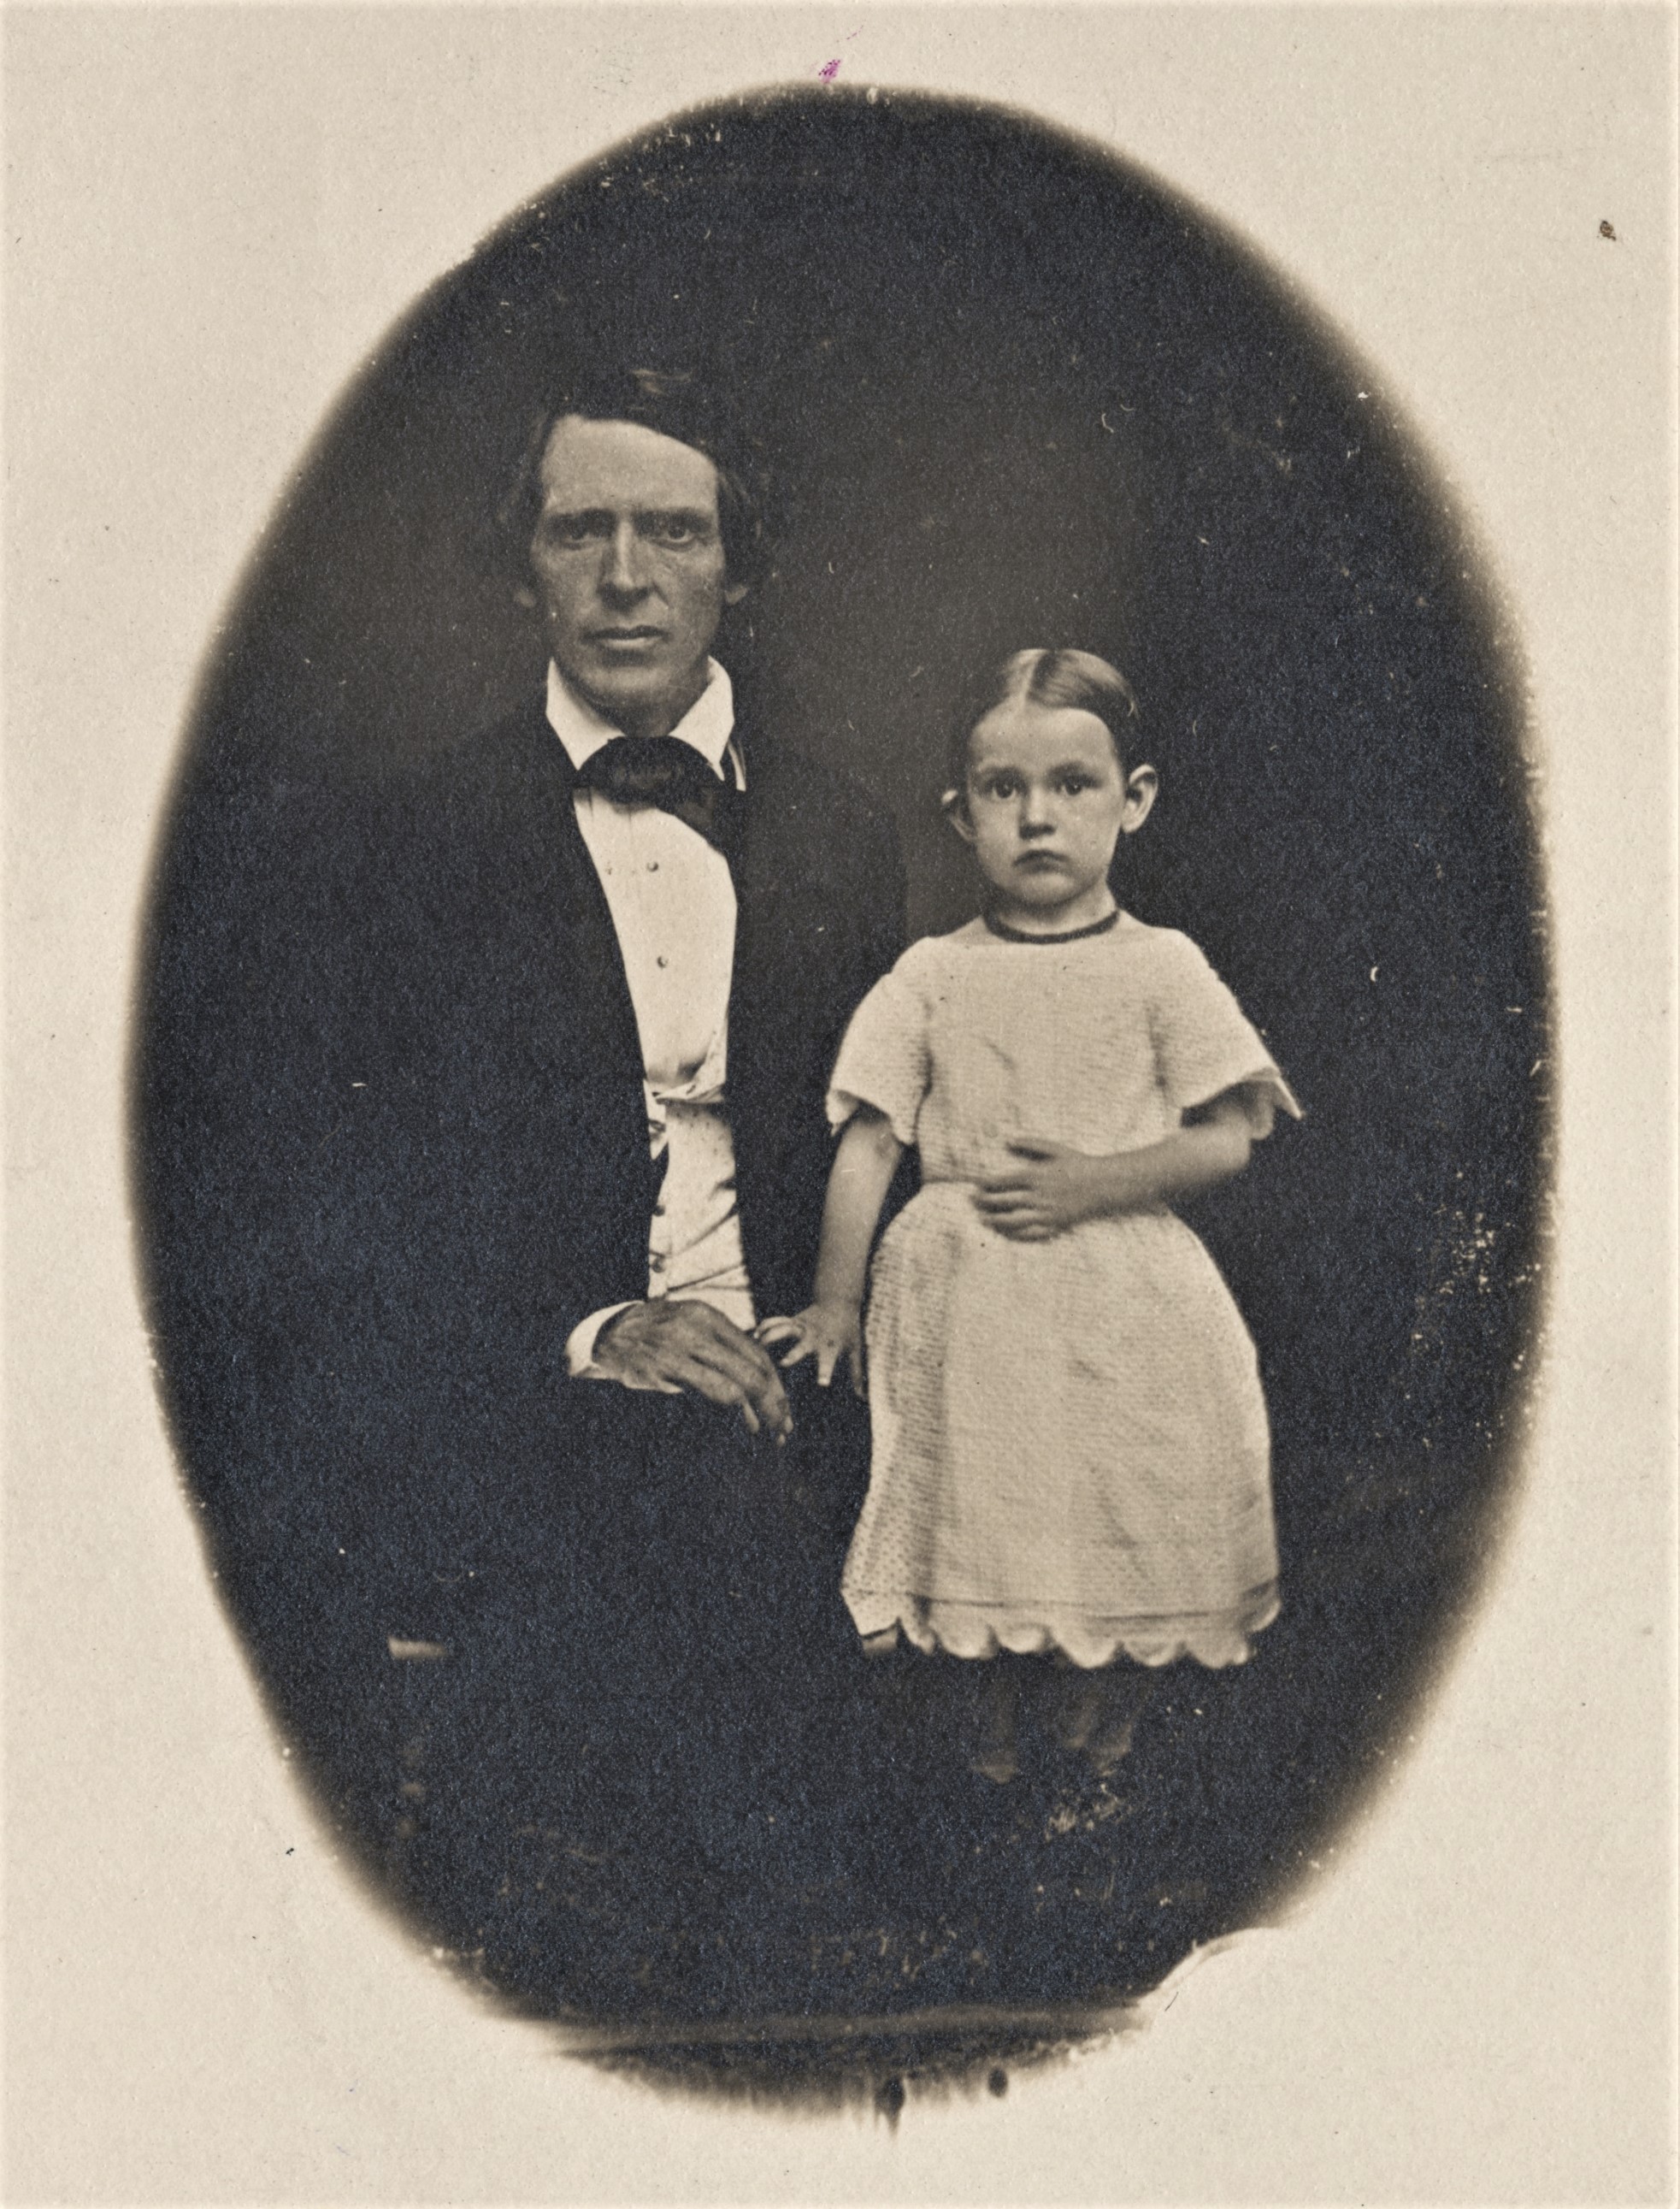 Northfield founder John W. North and his daughter, Emma, in 1855. Find this primary source along with others in the Settlement & Immigration Primary Source Set on the Northfield History Collaborative.